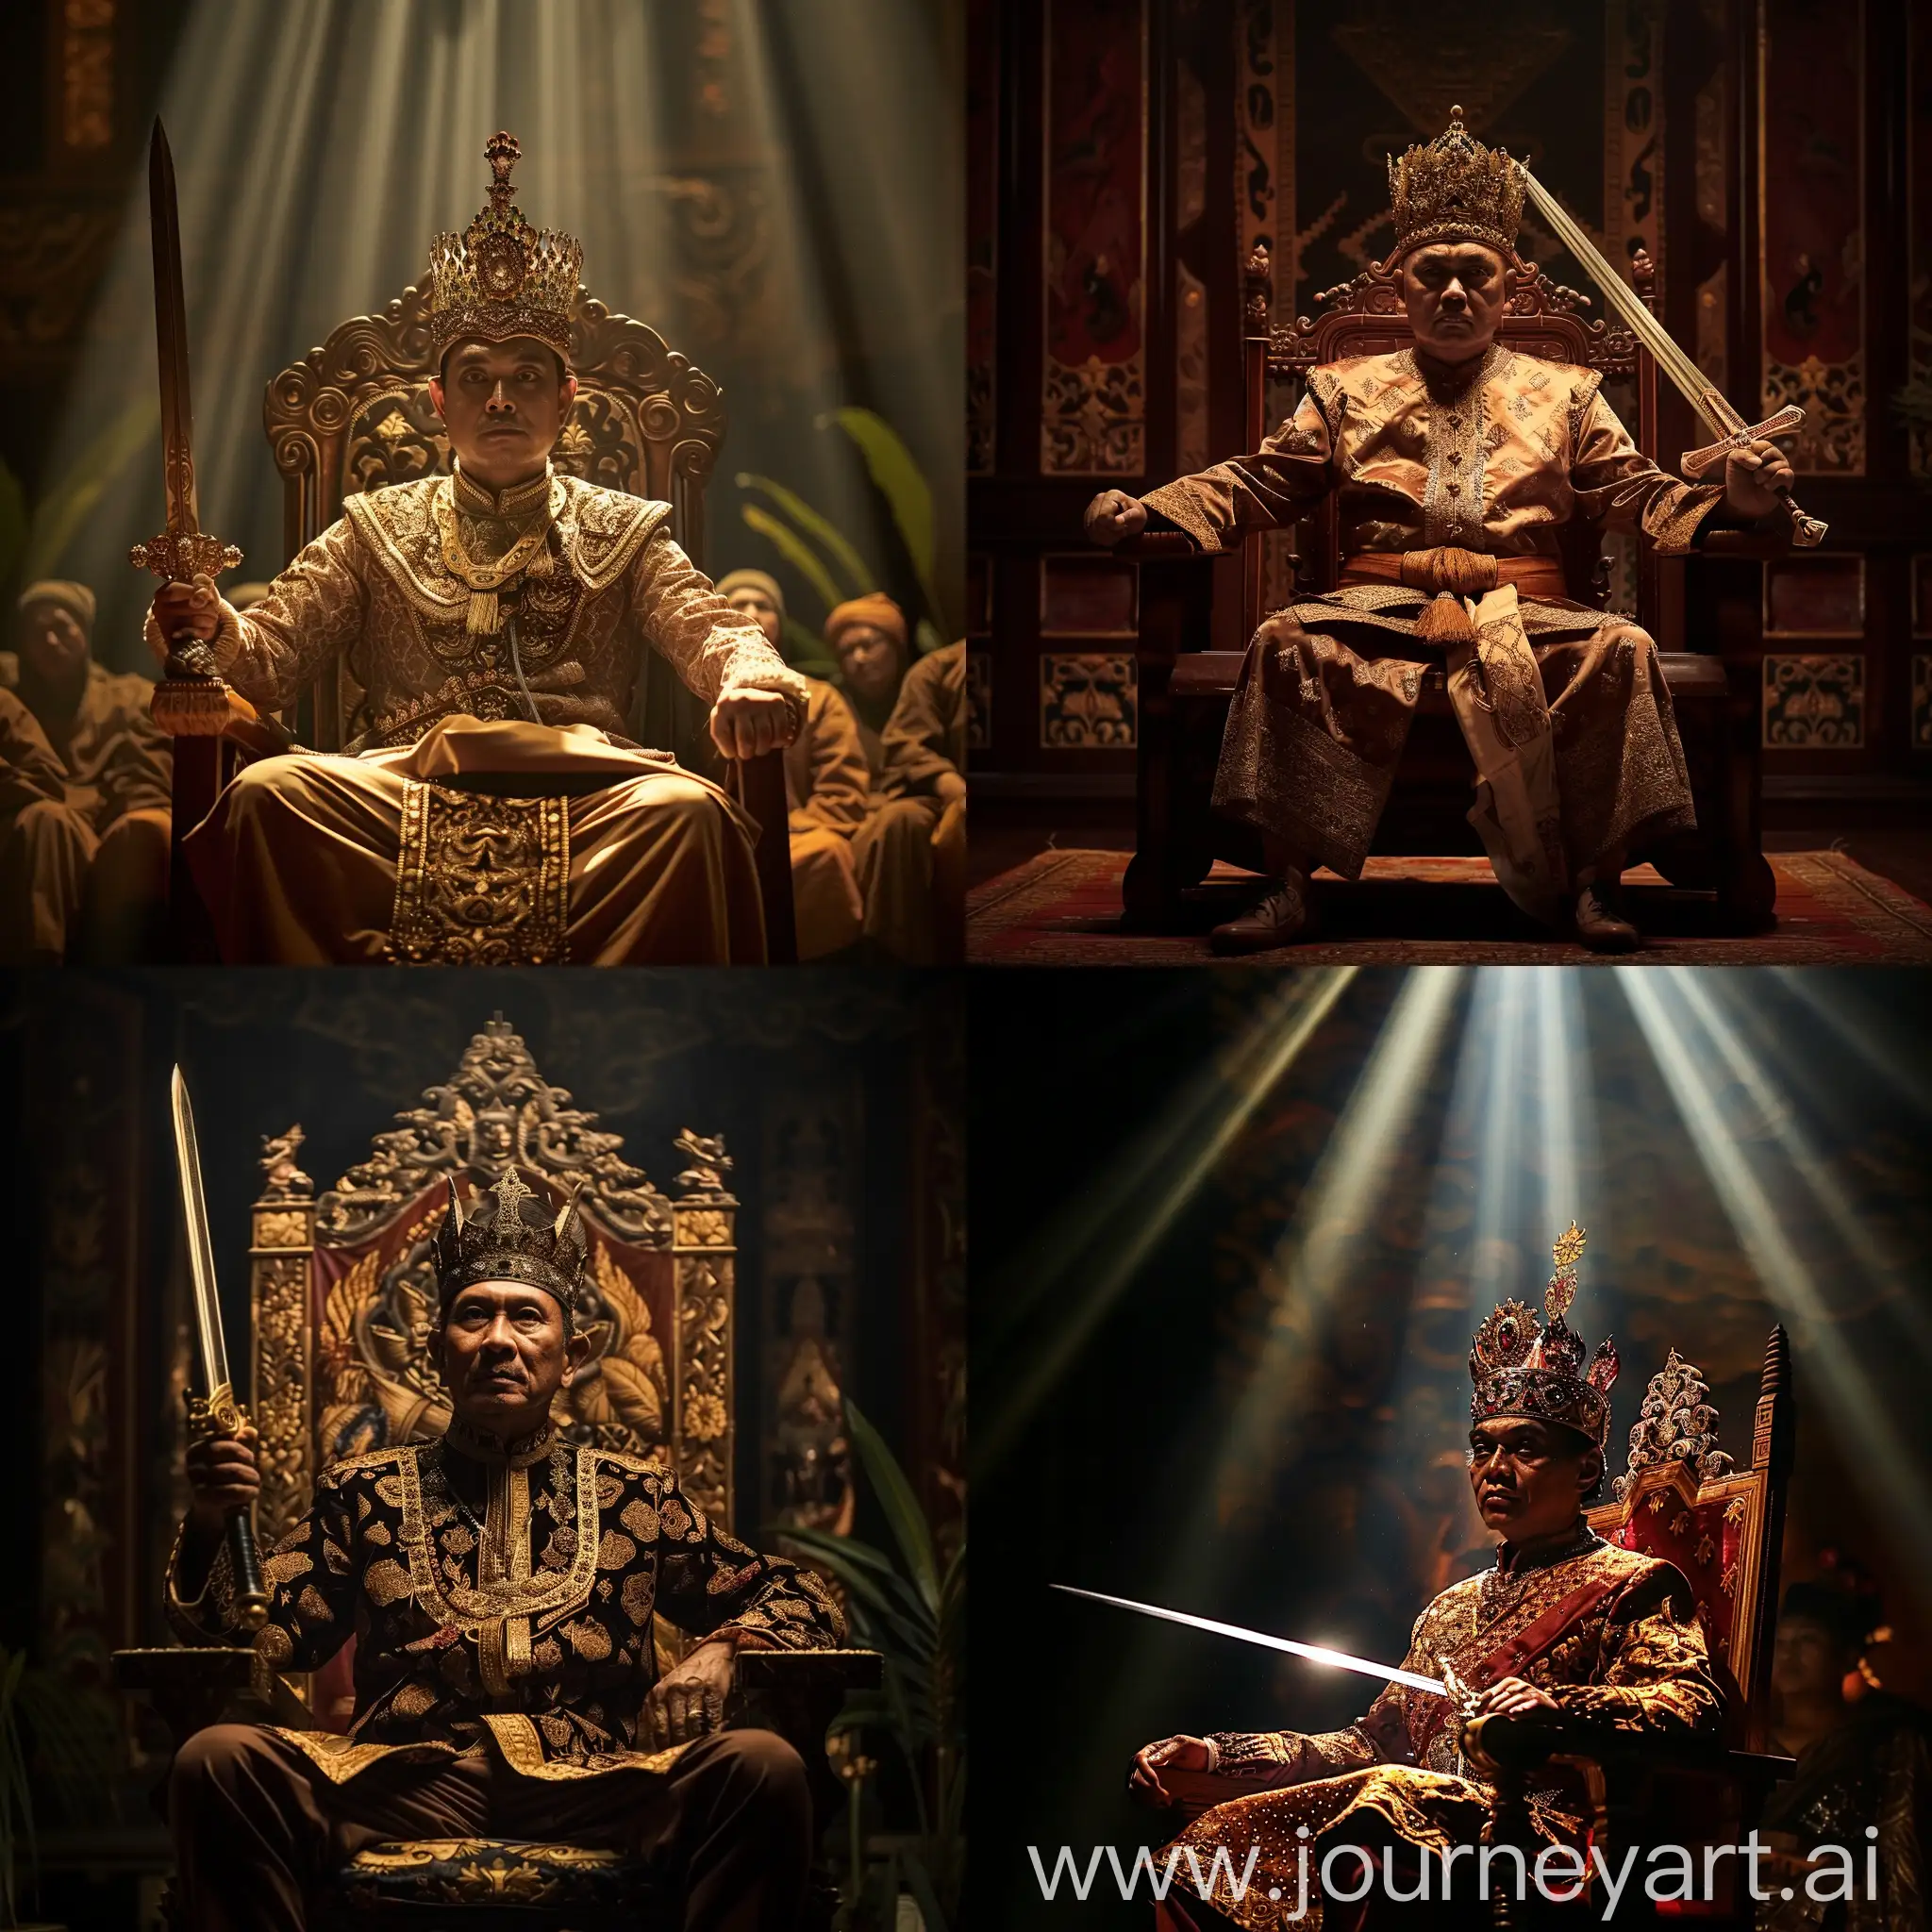 cinematic image, an Indonesian Majapahit king, sitting in a royal chair, front seat from the audience, holding a sword, cinematic lighting